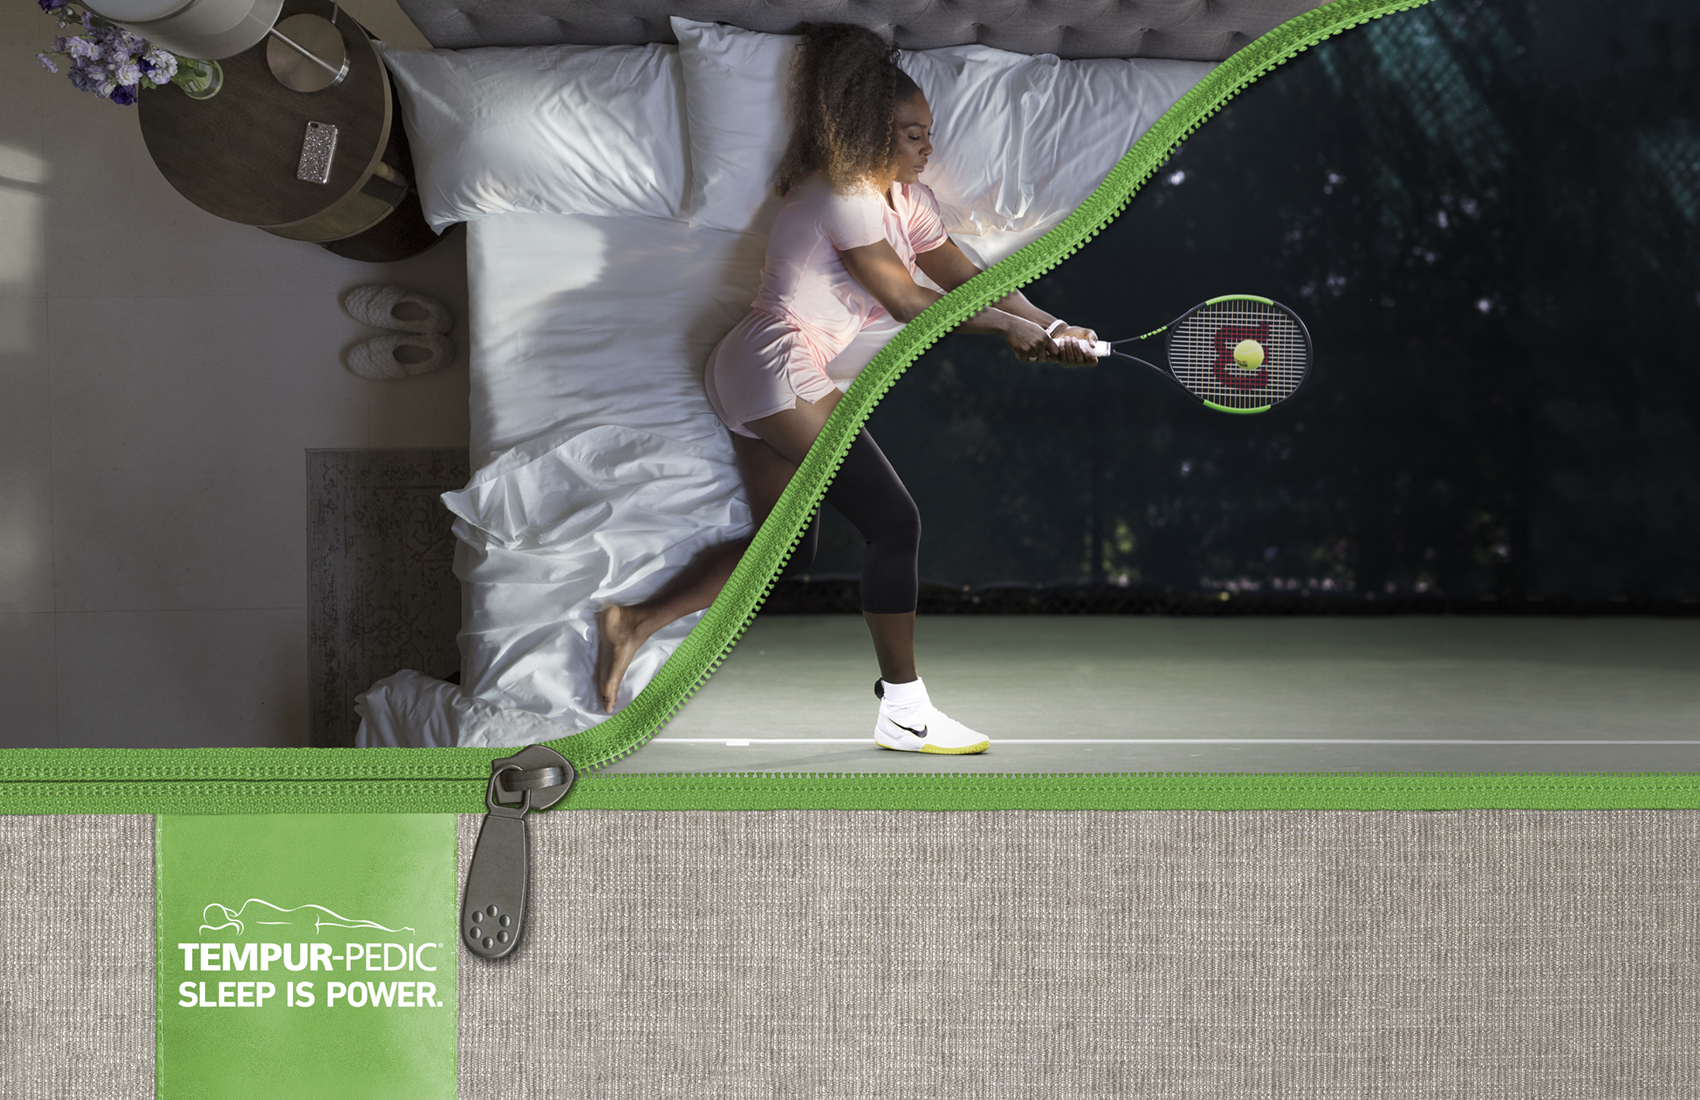 Serena Williams, the most dominant tennis player of all-time and a Tempur-Pedic owner for 10 years, is featured in the new “Tempur-Pedic Sleep Is Power” campaign to illustrate the importance of sleep in achieving success.